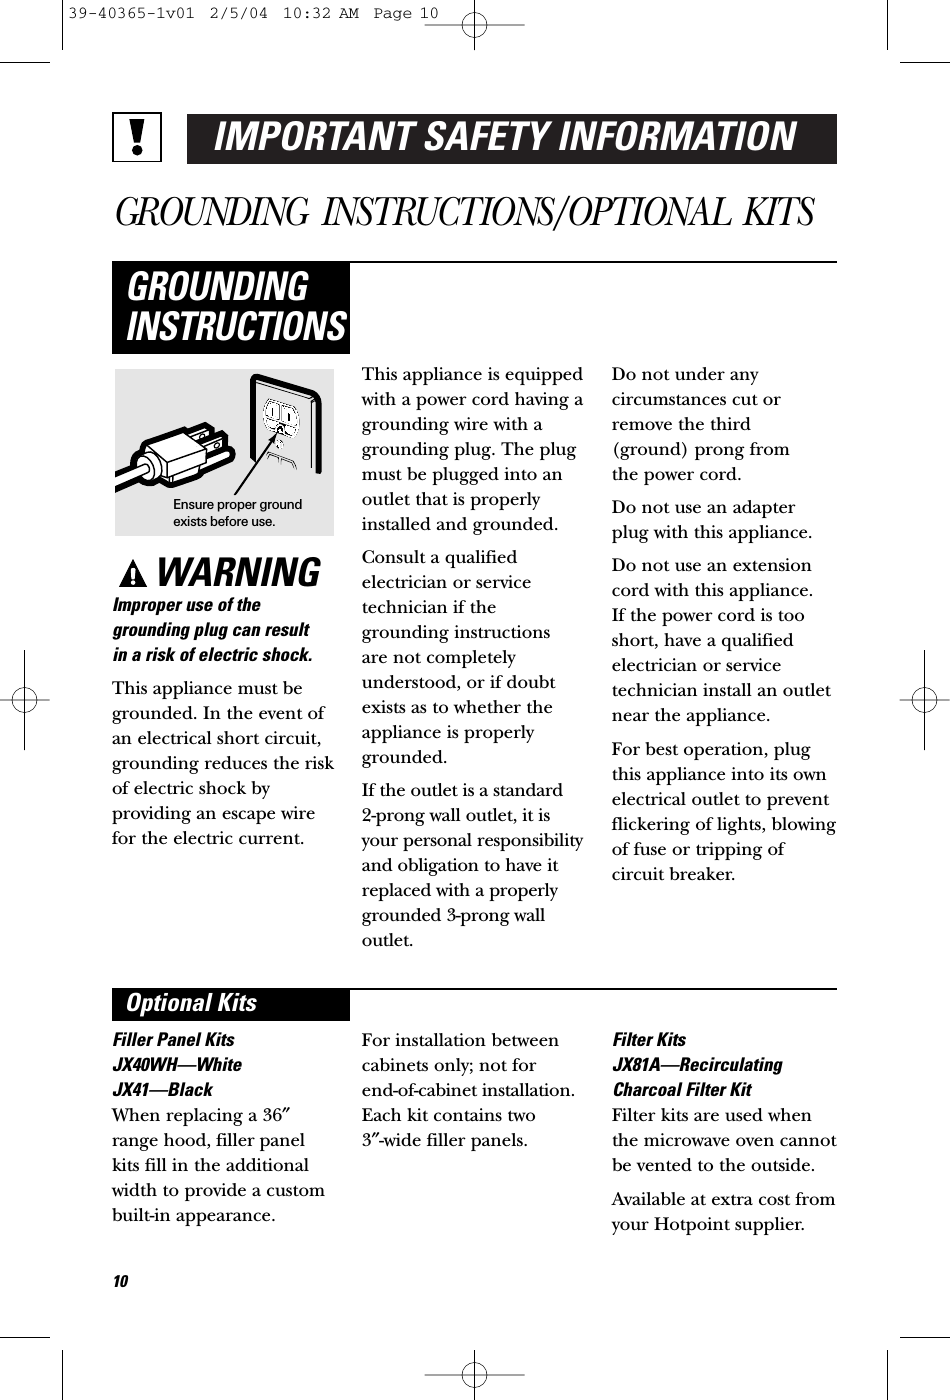 IMPORTANT SAFETY INFORMATIONGROUNDING INSTRUCTIONS/OPTIONAL KITSWARNINGImproper use of thegrounding plug can result in a risk of electric shock.This appliance must begrounded. In the event ofan electrical short circuit,grounding reduces the riskof electric shock byproviding an escape wirefor the electric current. This appliance is equippedwith a power cord having agrounding wire with agrounding plug. The plugmust be plugged into anoutlet that is properlyinstalled and grounded.Consult a qualified electrician or servicetechnician if thegrounding instructions are not completelyunderstood, or if doubtexists as to whether theappliance is properlygrounded.If the outlet is a standard 2-prong wall outlet, it isyour personal responsibilityand obligation to have itreplaced with a properlygrounded 3-prong walloutlet.Do not under any circumstances cut orremove the third (ground) prong from the power cord.Do not use an adapterplug with this appliance.Do not use an extensioncord with this appliance. If the power cord is tooshort, have a qualifiedelectrician or servicetechnician install an outletnear the appliance.For best operation, plugthis appliance into its ownelectrical outlet to preventflickering of lights, blowingof fuse or tripping ofcircuit breaker.GROUNDINGINSTRUCTIONSFiller Panel KitsJX40WH—WhiteJX41—BlackWhen replacing a 36″range hood, filler panelkits fill in the additionalwidth to provide a custombuilt-in appearance. For installation betweencabinets only; not for end-of-cabinet installation.Each kit contains two 3″-wide filler panels.Filter KitsJX81A—RecirculatingCharcoal Filter KitFilter kits are used whenthe microwave oven cannotbe vented to the outside.Available at extra cost fromyour Hotpoint supplier.Optional KitsEnsure proper groundexists before use.1039-40365-1v01  2/5/04  10:32 AM  Page 10